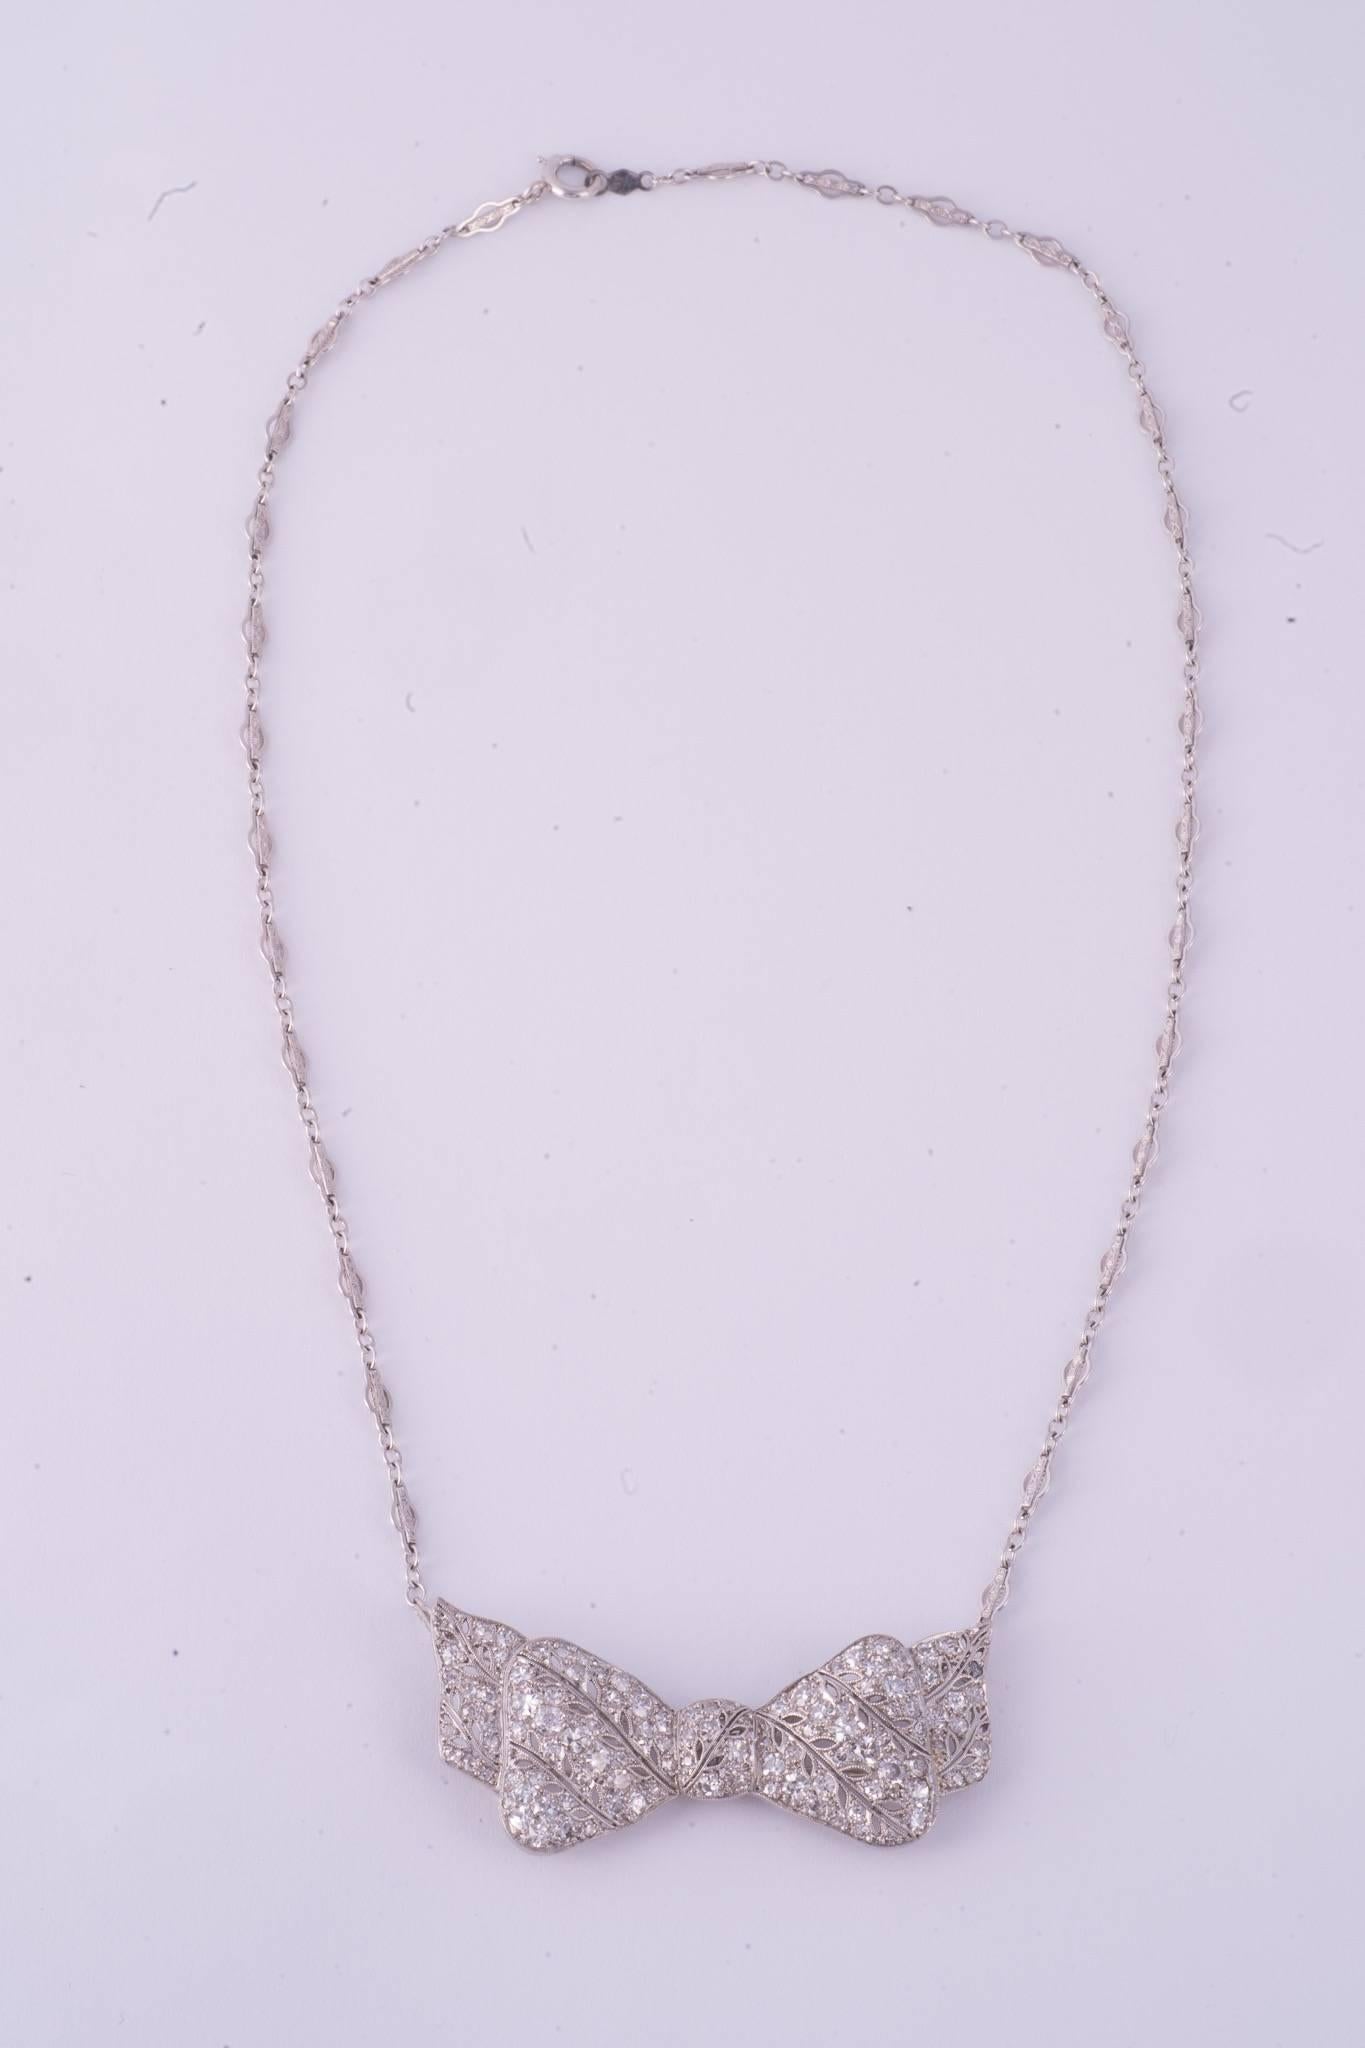 Art Deco Dimaond Bow Necklace. The there are 105 diamonds and they weigh approx. 5.05cts . the necklace is platinum. Chain comes off to wear as a brooch.